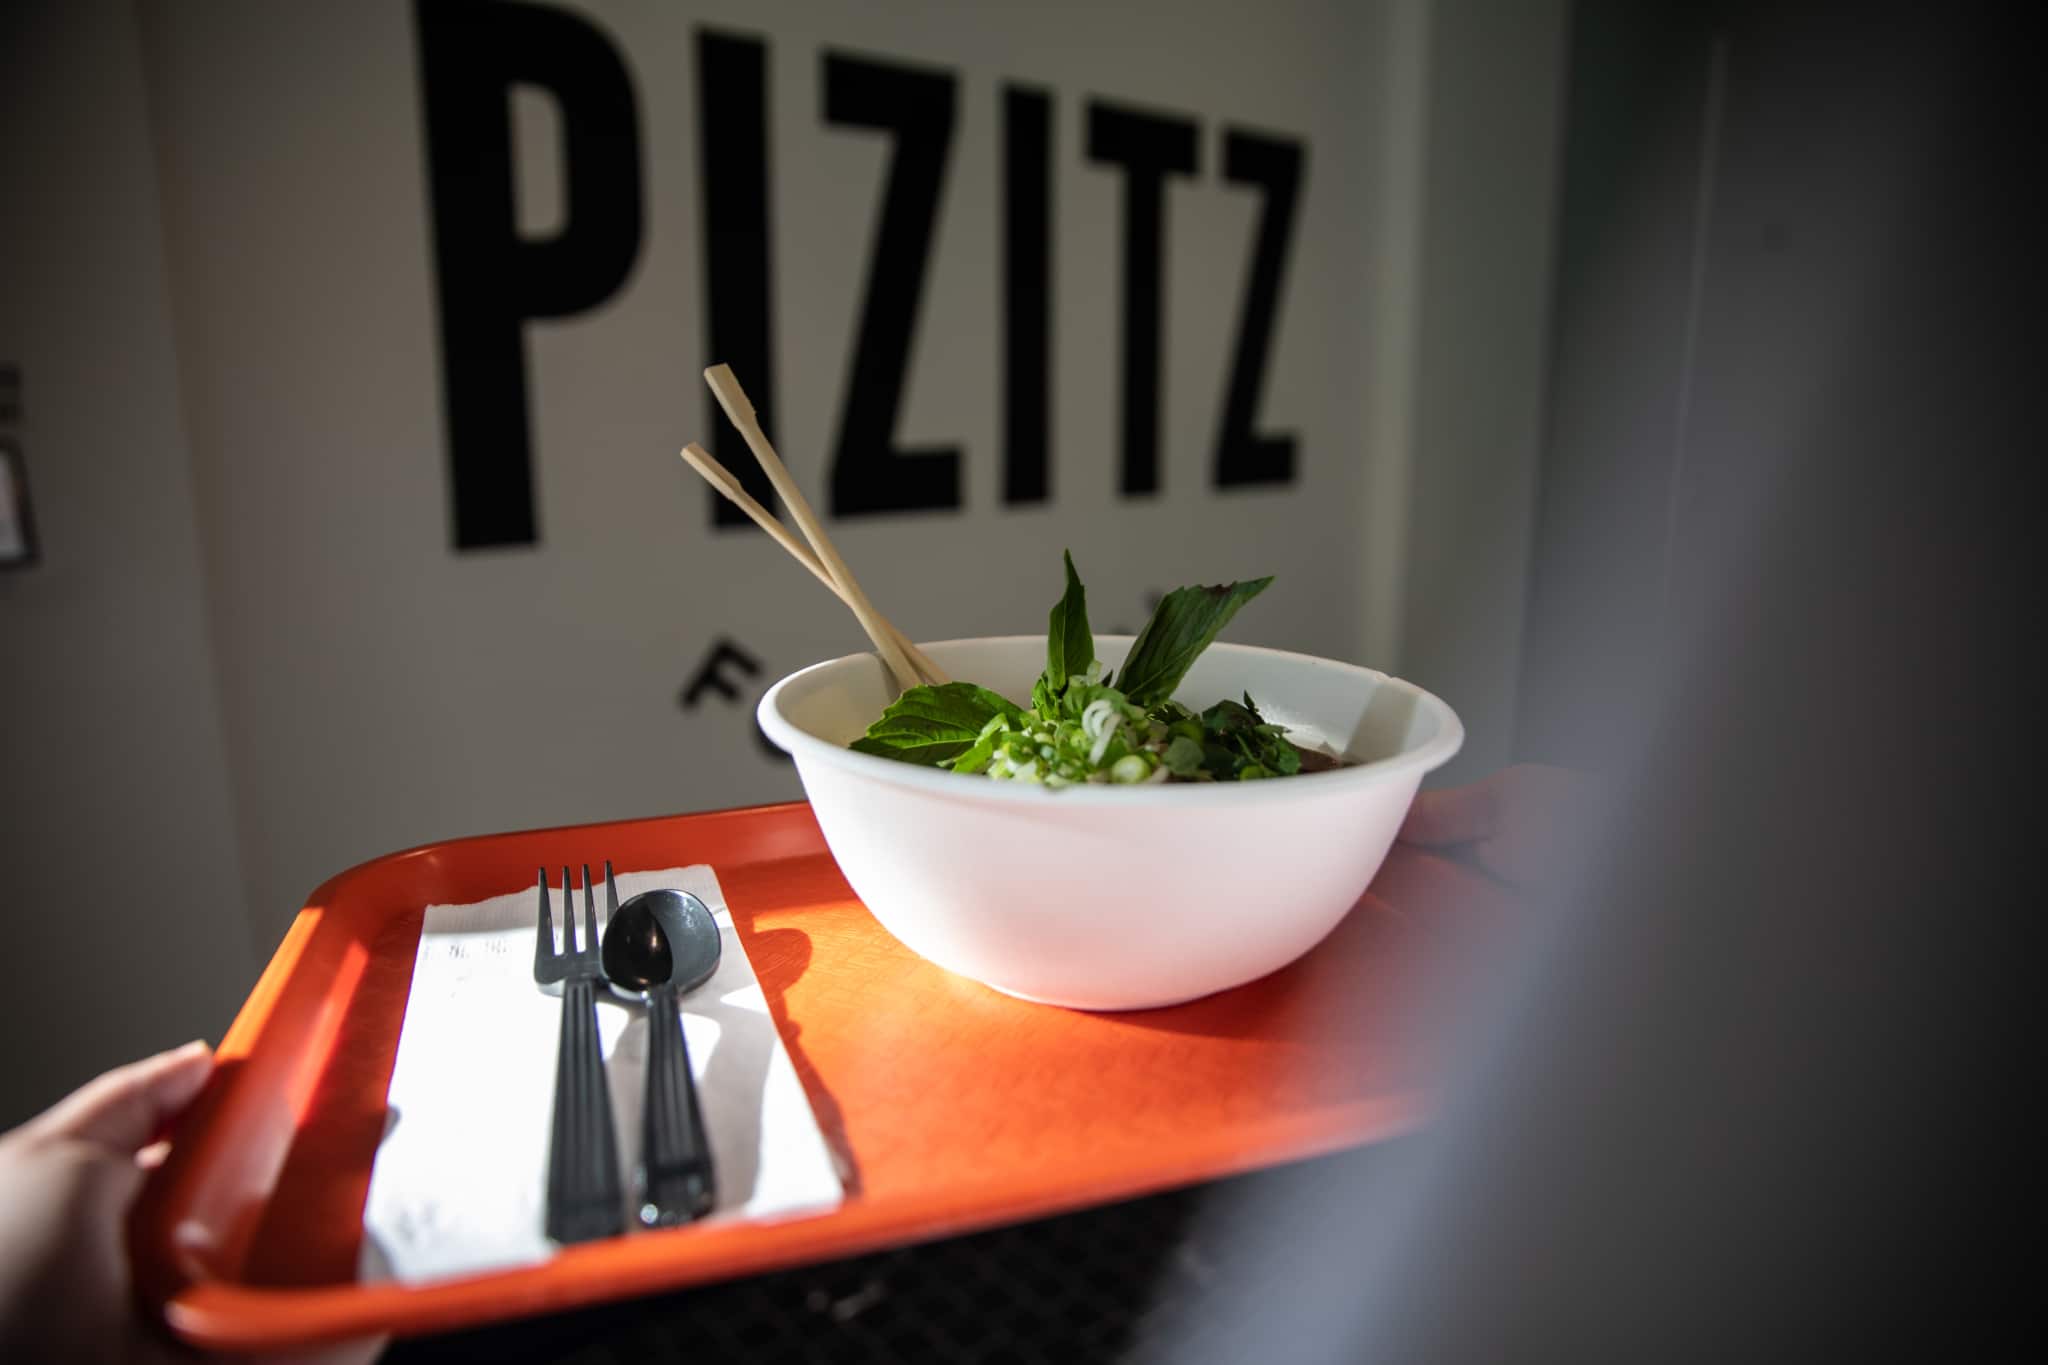 Pizitz Food Hall Pho Pho scaled Sweet views, great food + more—5 perks of living at The Pizitz in Downtown Birmingham